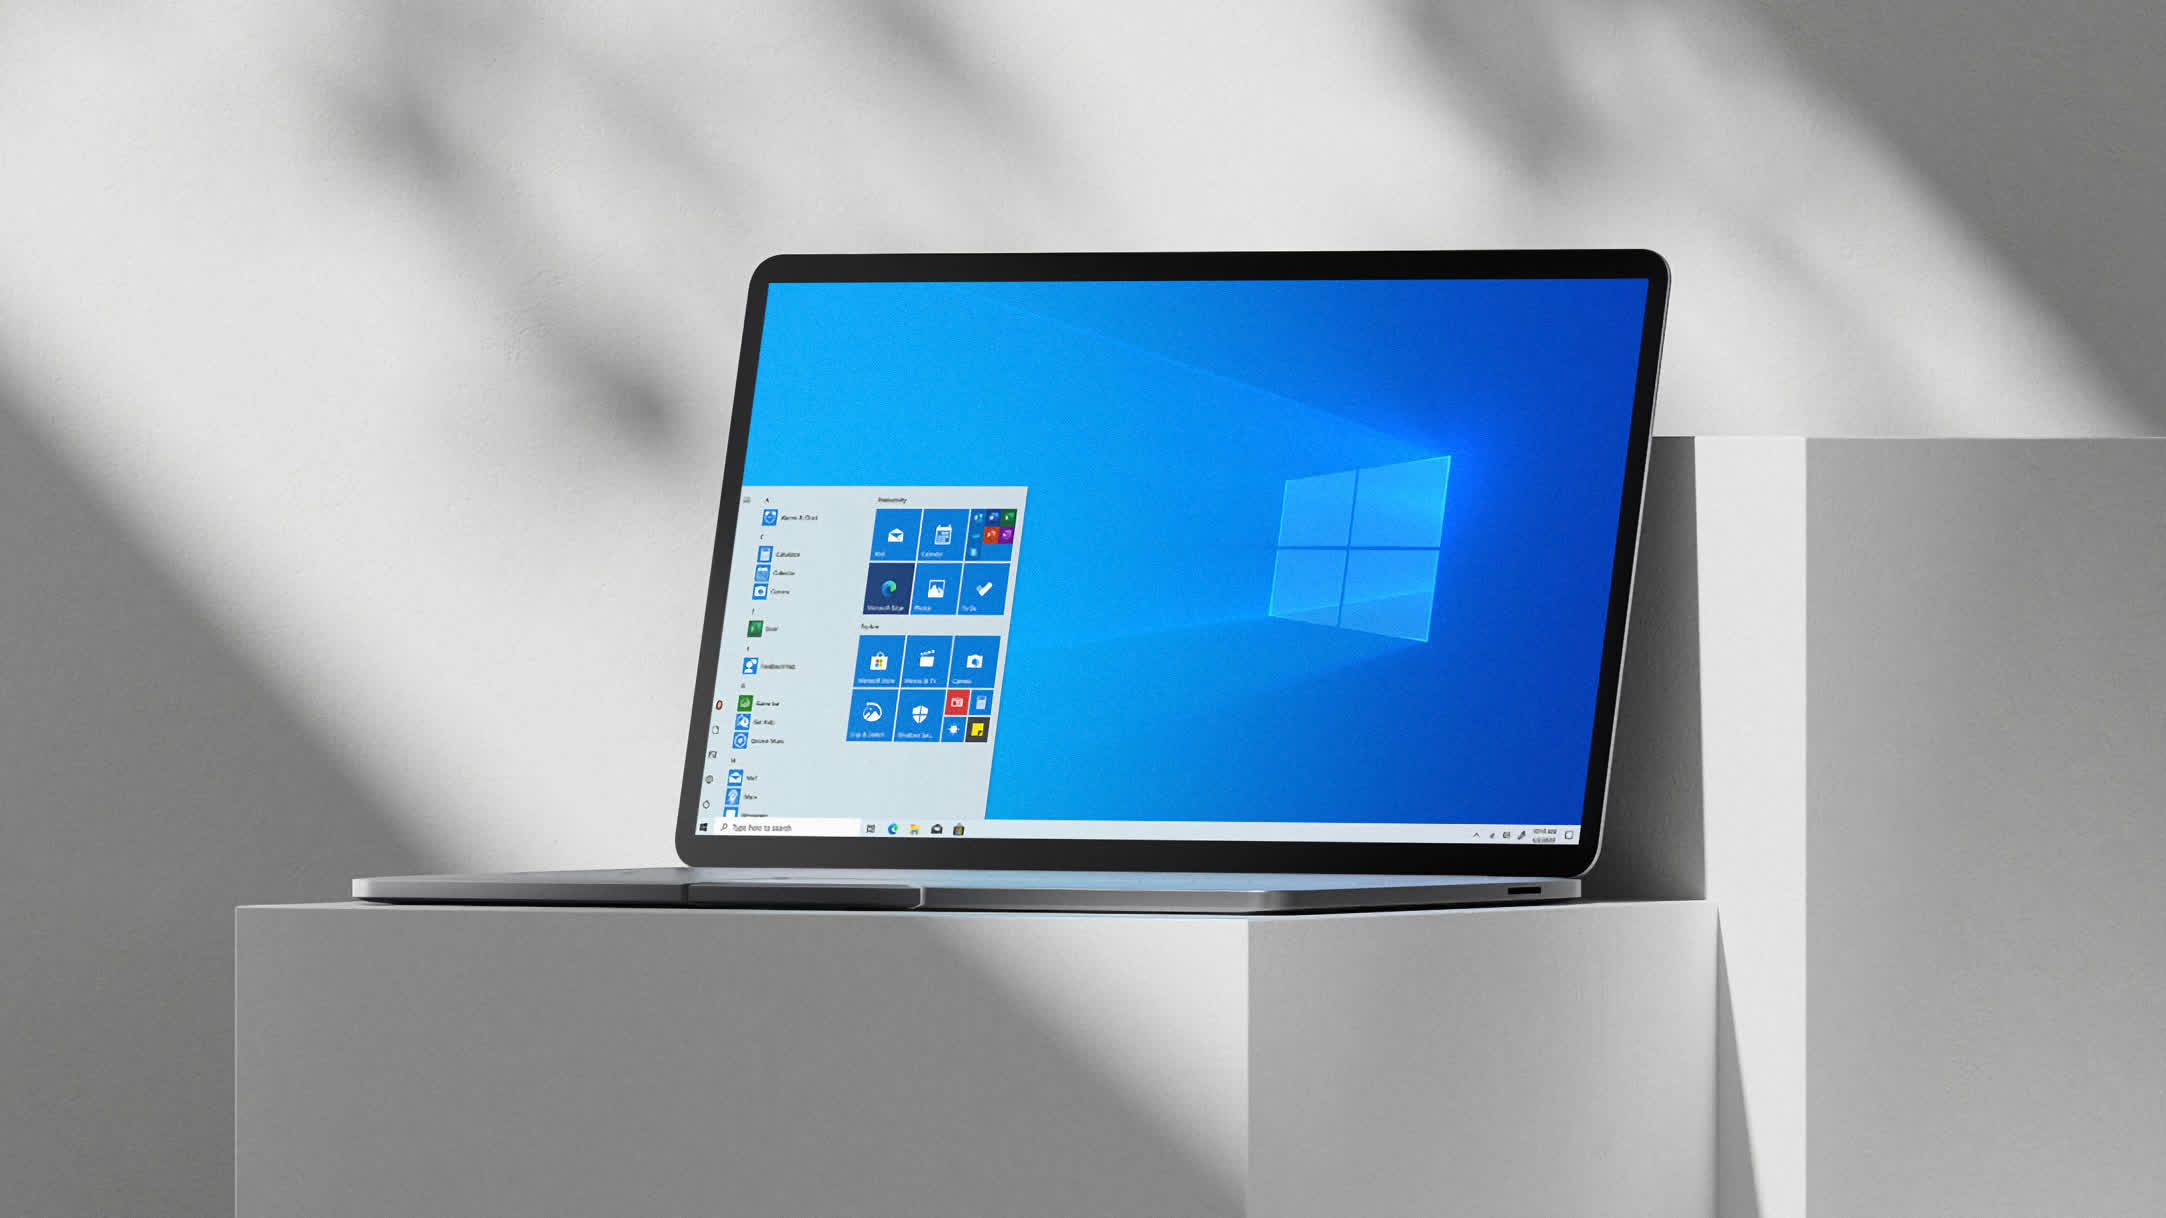 As the dust settles with Windows 11, Microsoft is readying the rollout of Windows 10 21H2